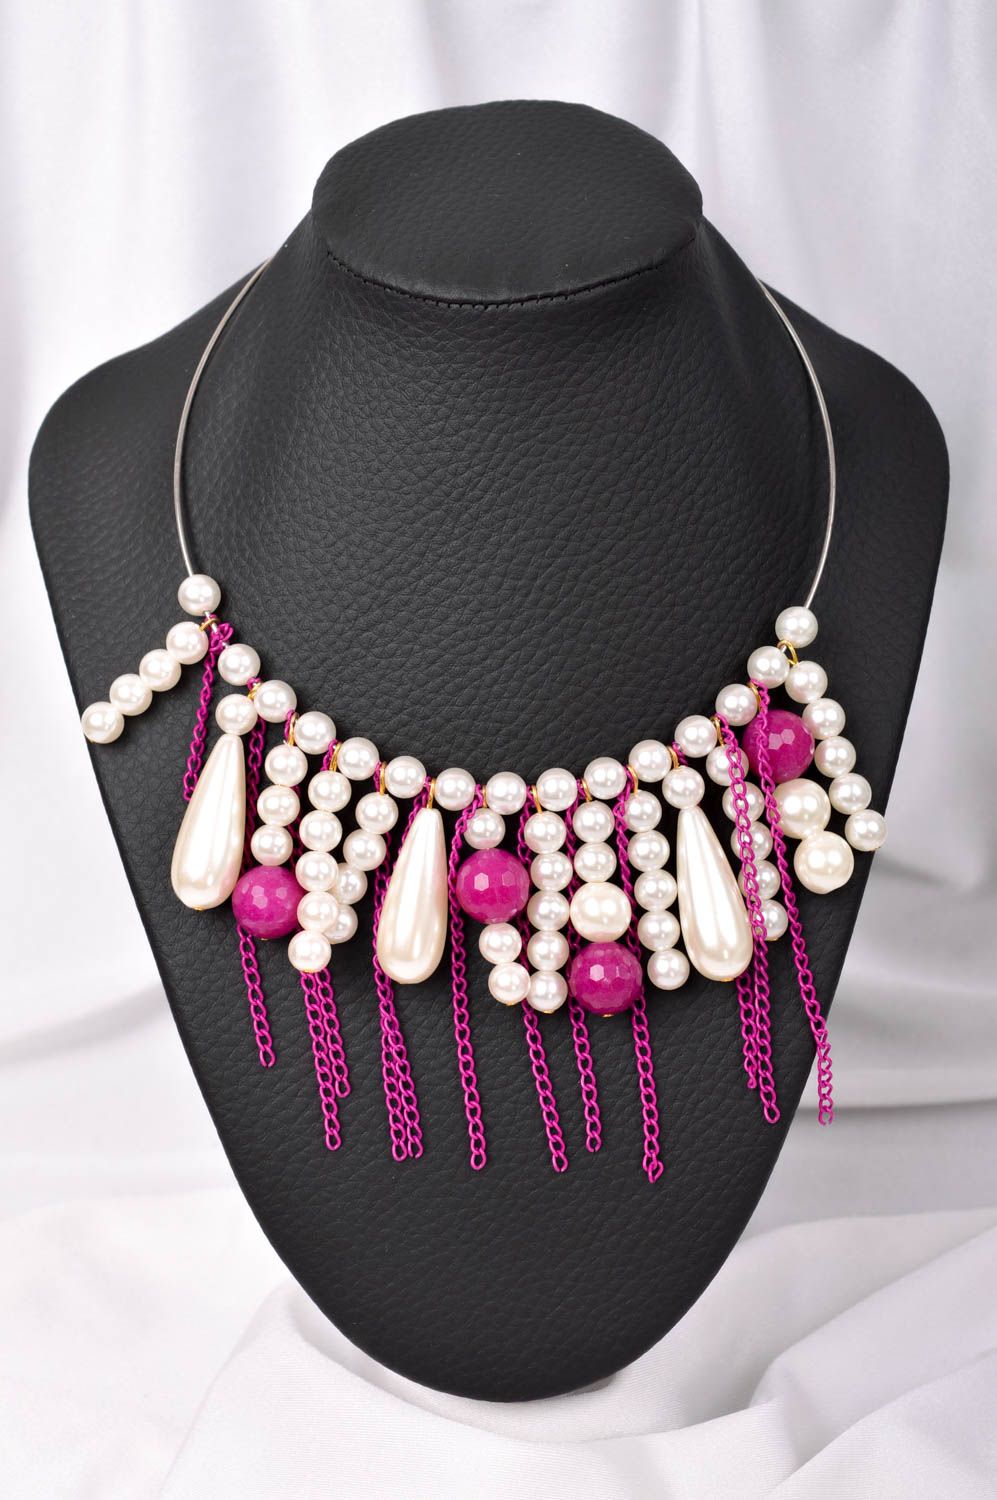 Handmade necklace necklace with natural stones fashion beaded jewelry girl gift photo 1